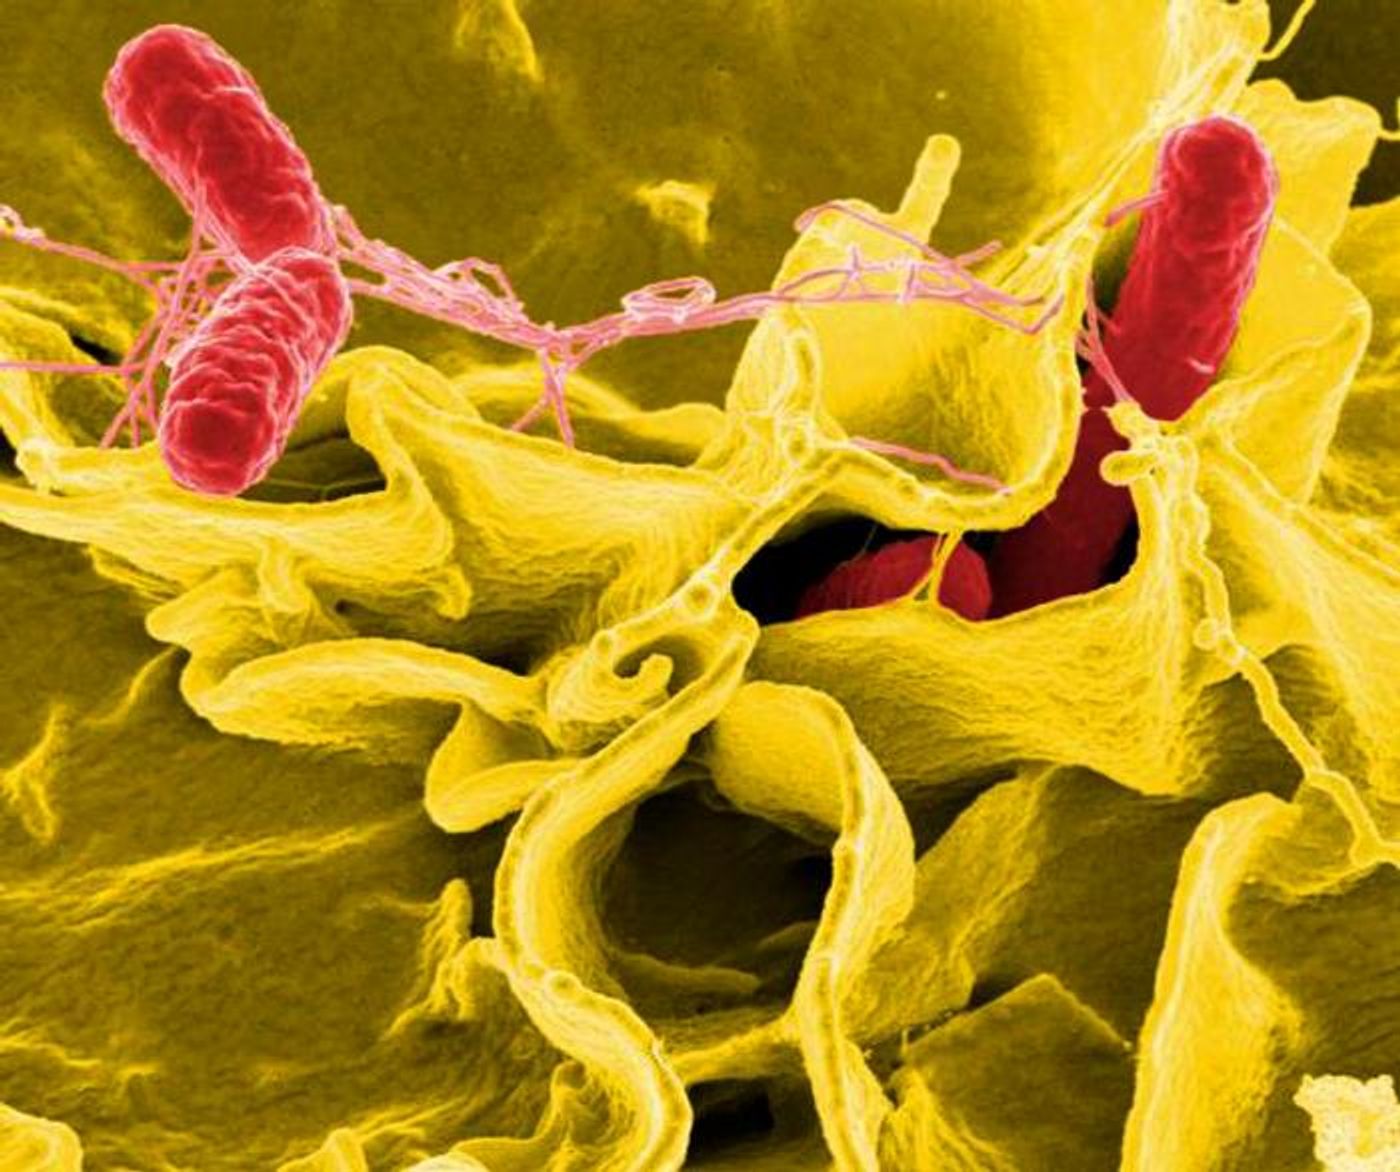 A digitally-colorized scanning electron microscopic (SEM) image of red-colored, Salmonella sp. bacteria as they were in the process of invading a mustard-colored, ruffled, immune cell. Salmonella are a type of Proteobacteria / Credit: National Institute of Allergy and Infectious Diseases (NIAID)